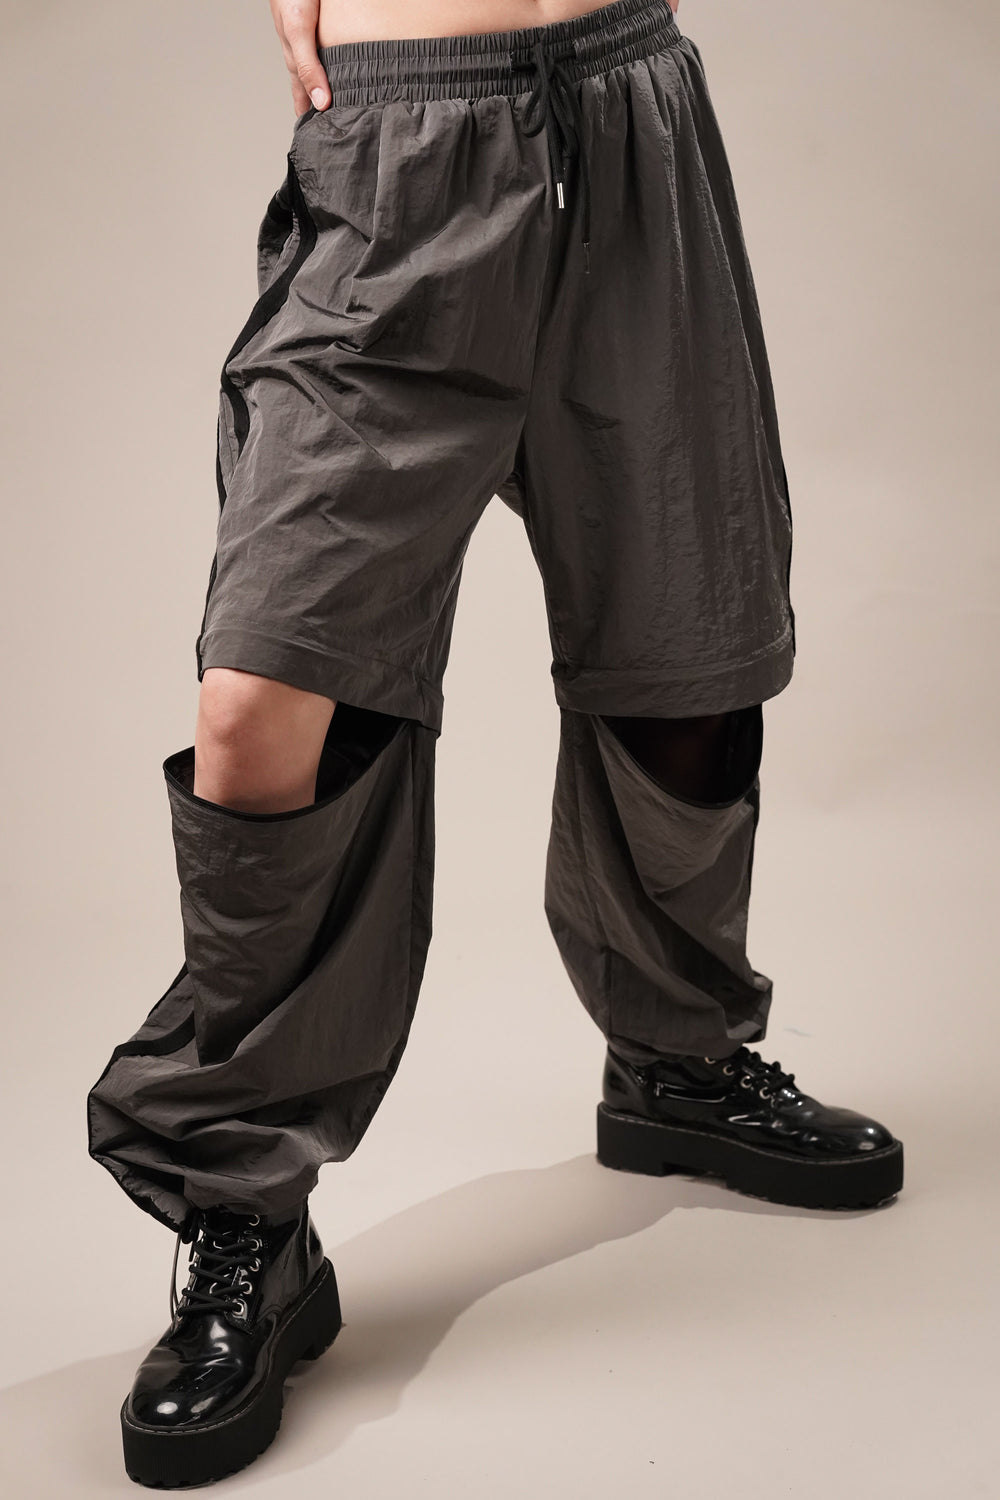 iron grey loungewear trousers with pockets